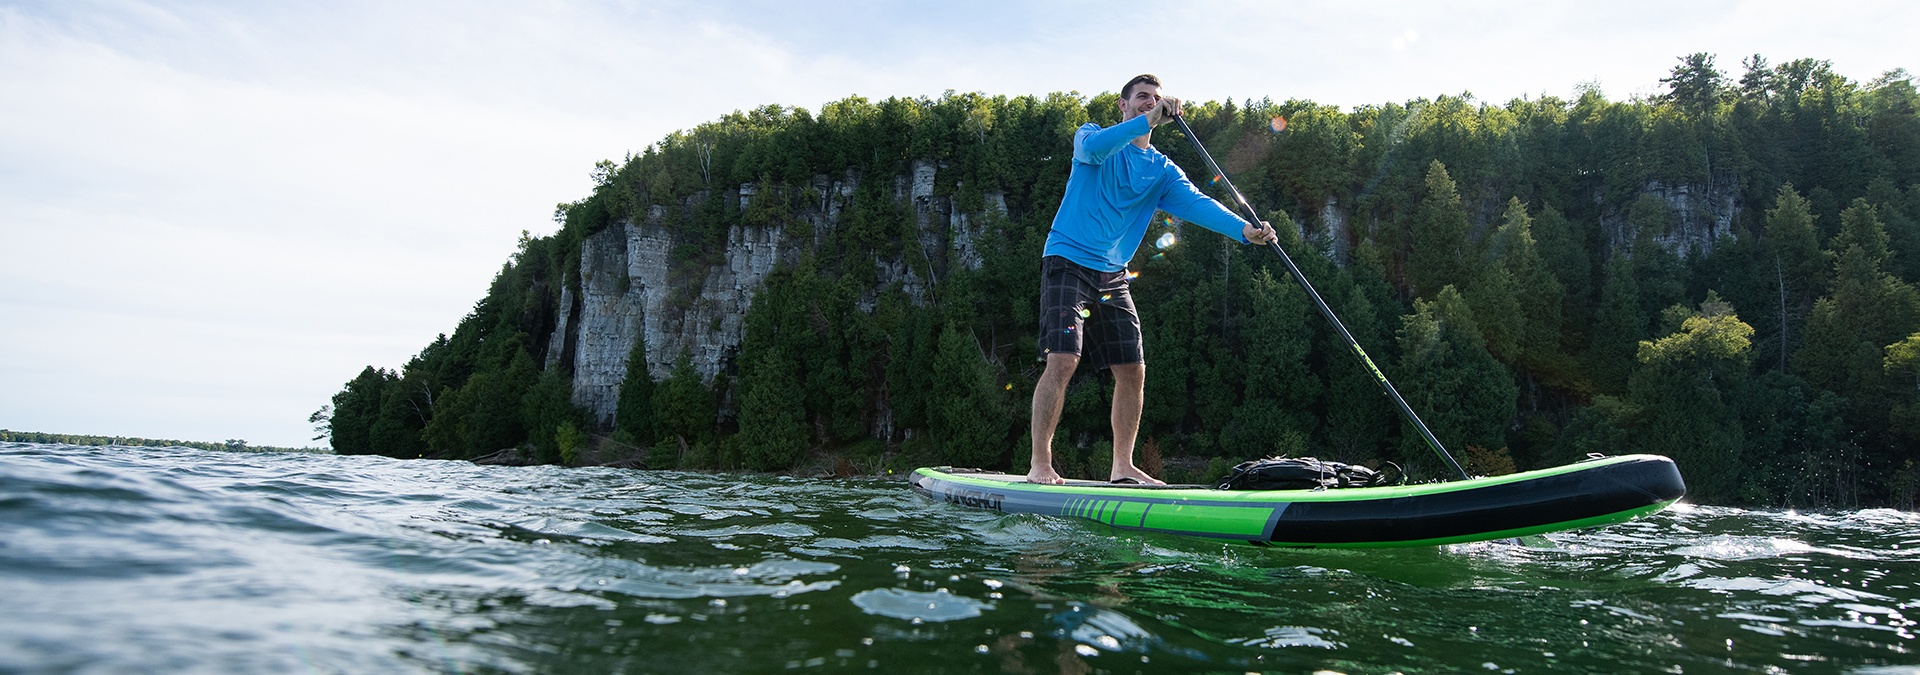 A man paddle boards on the lake with the bluffs of the Niagara Escarpment behind him